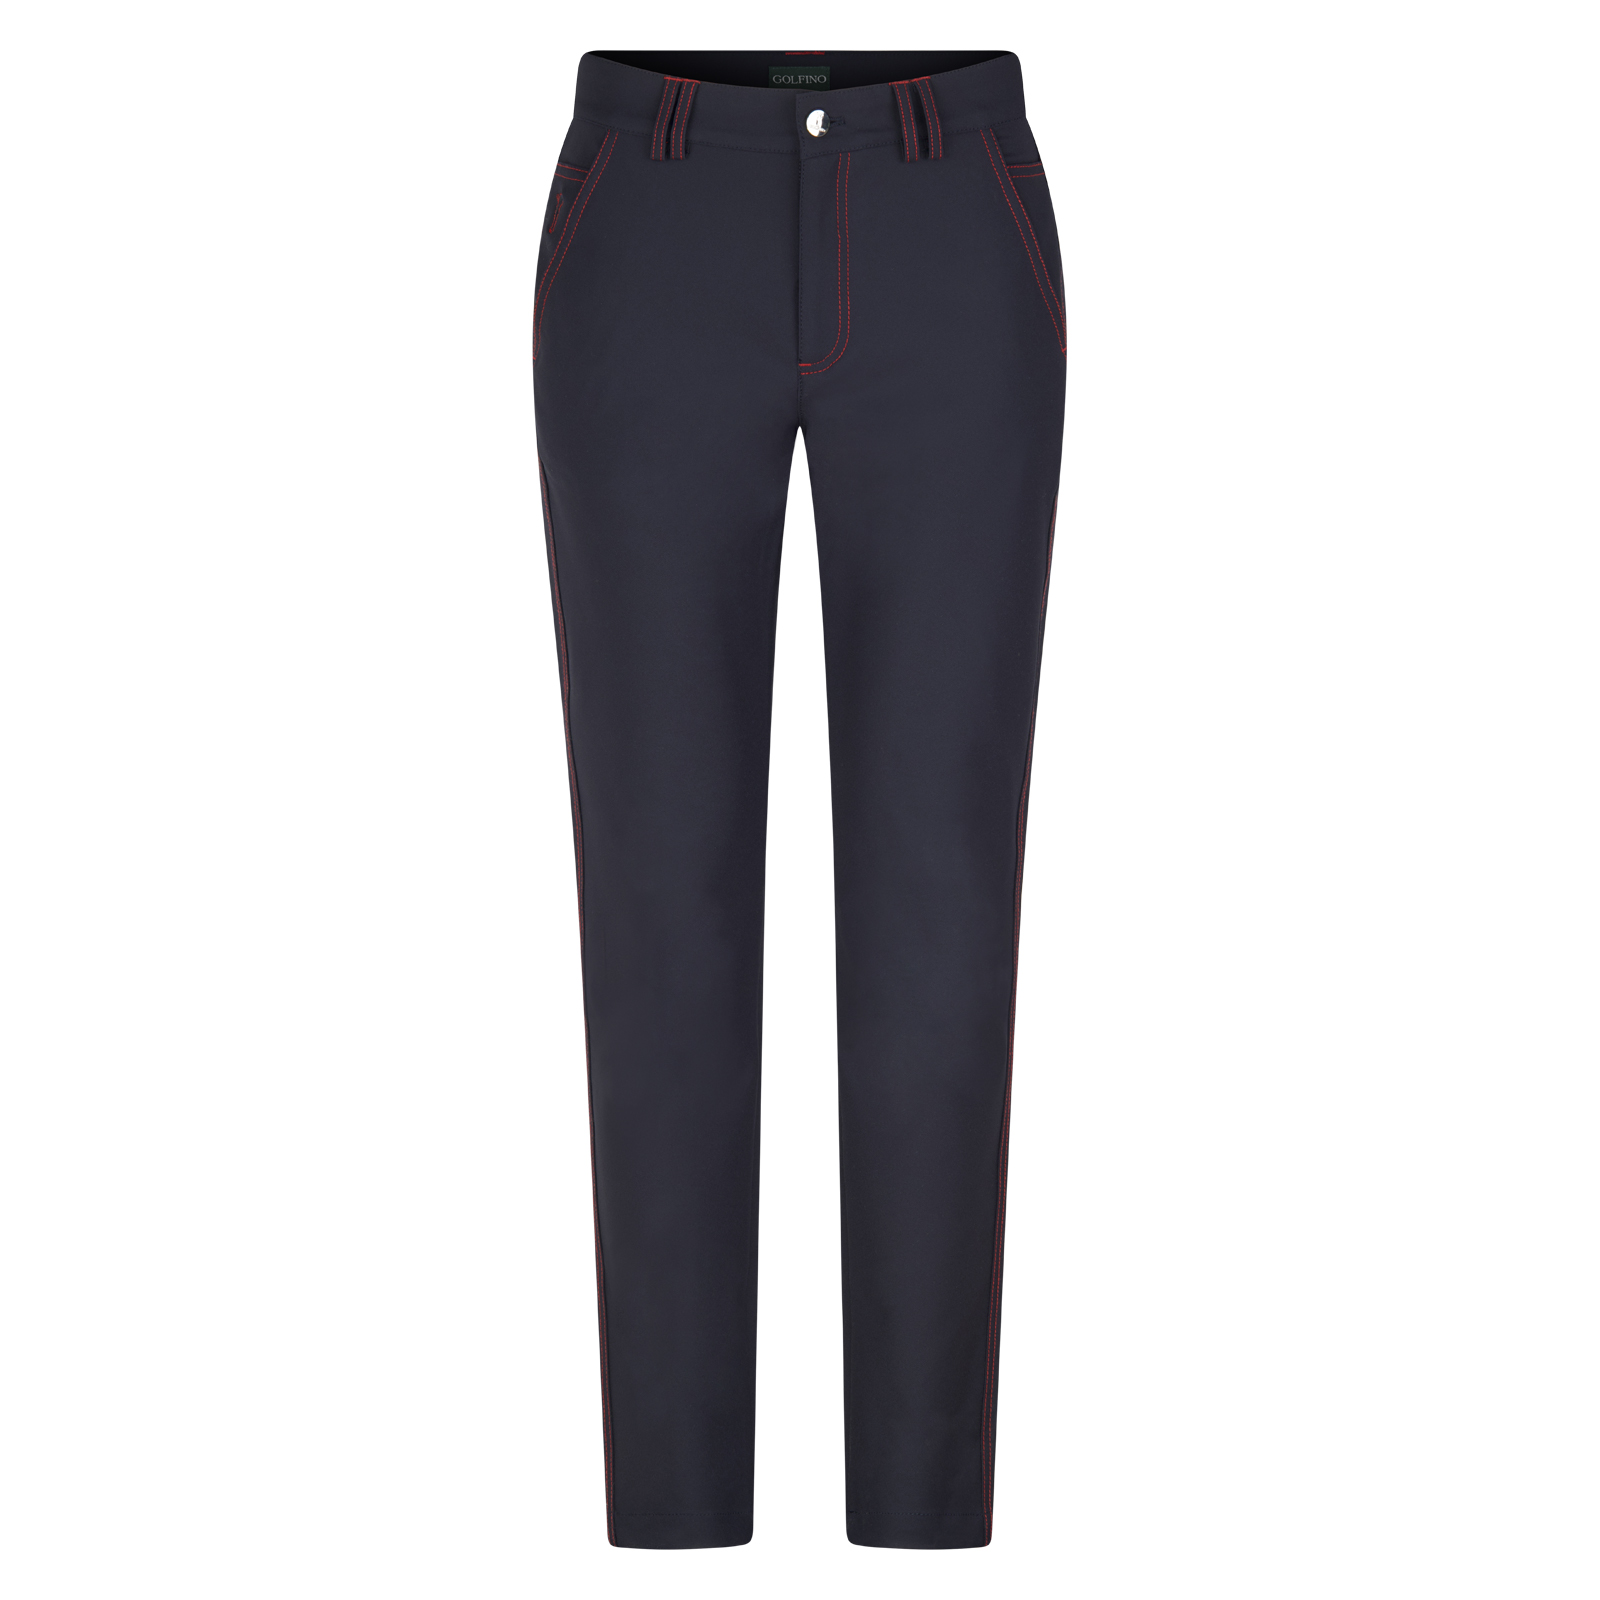 Ladies' water-repellent jeans-style slim fit golf trousers